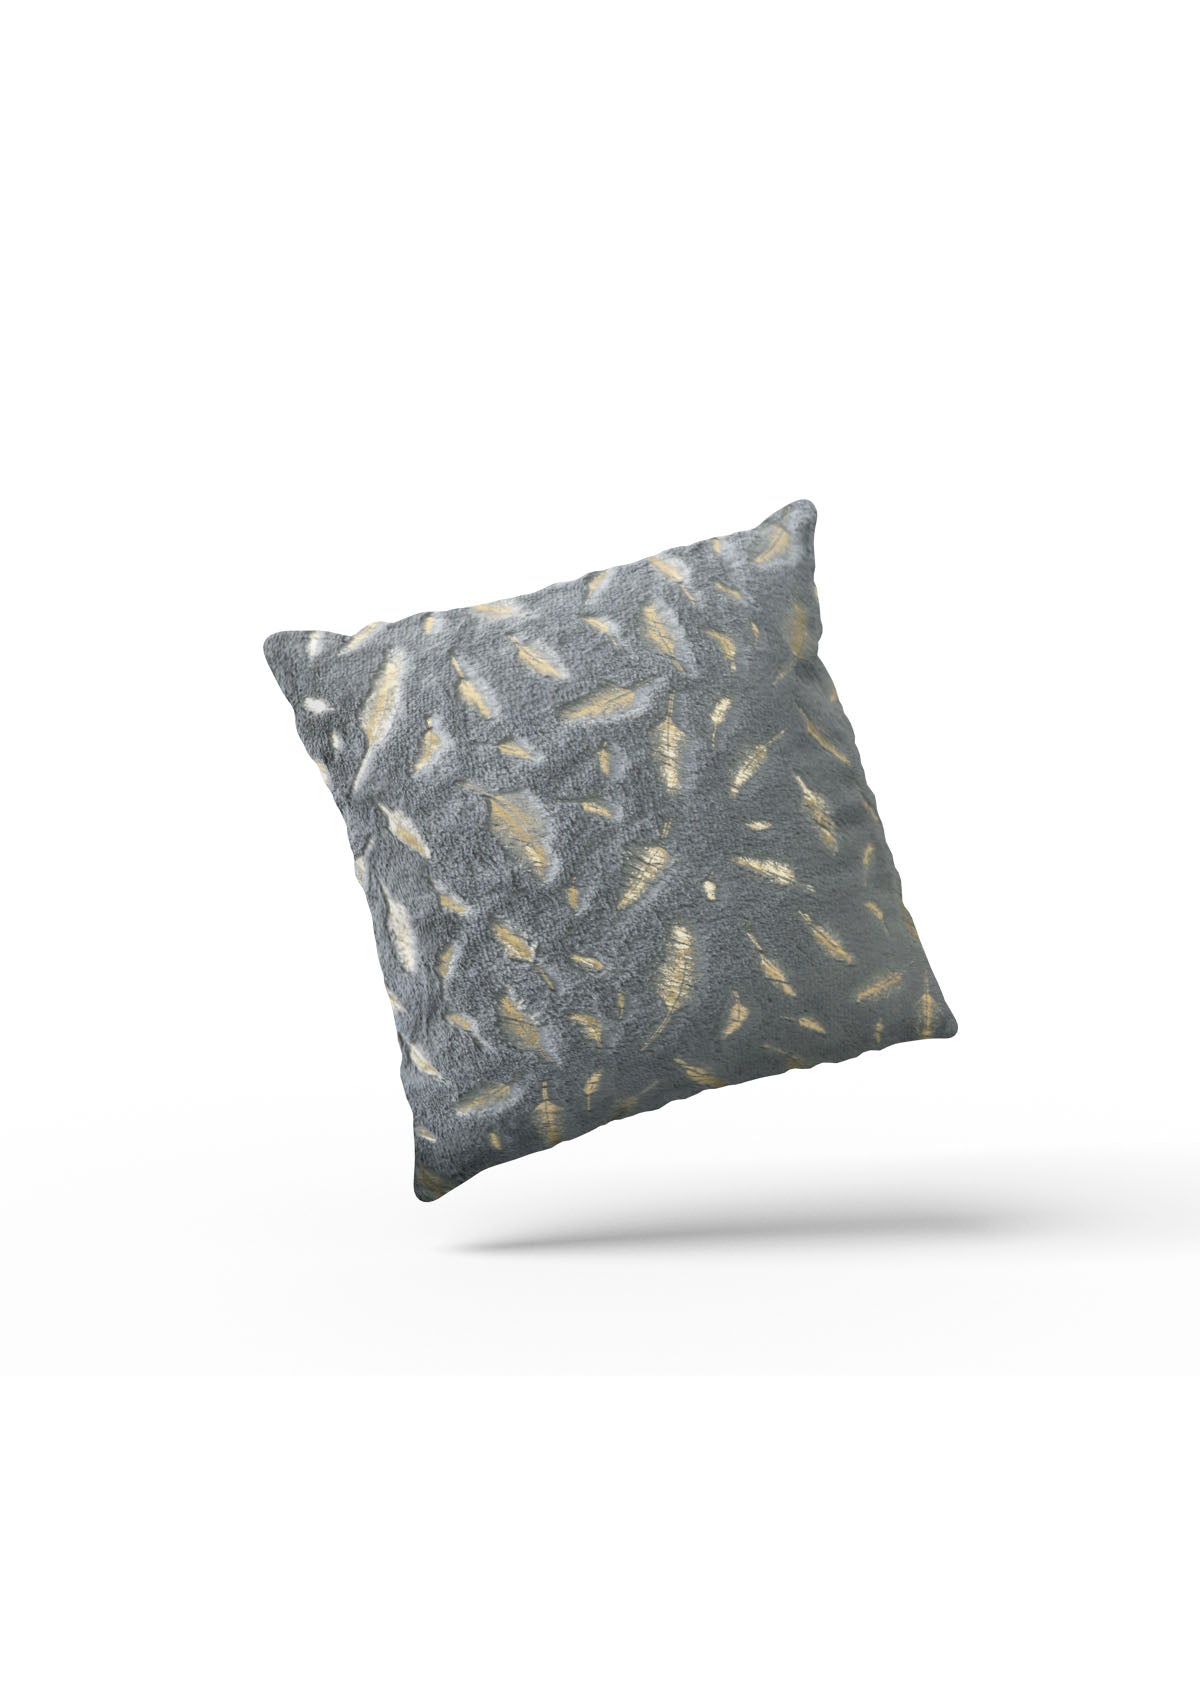 Exquisite Gold and Grey Cushion Covers